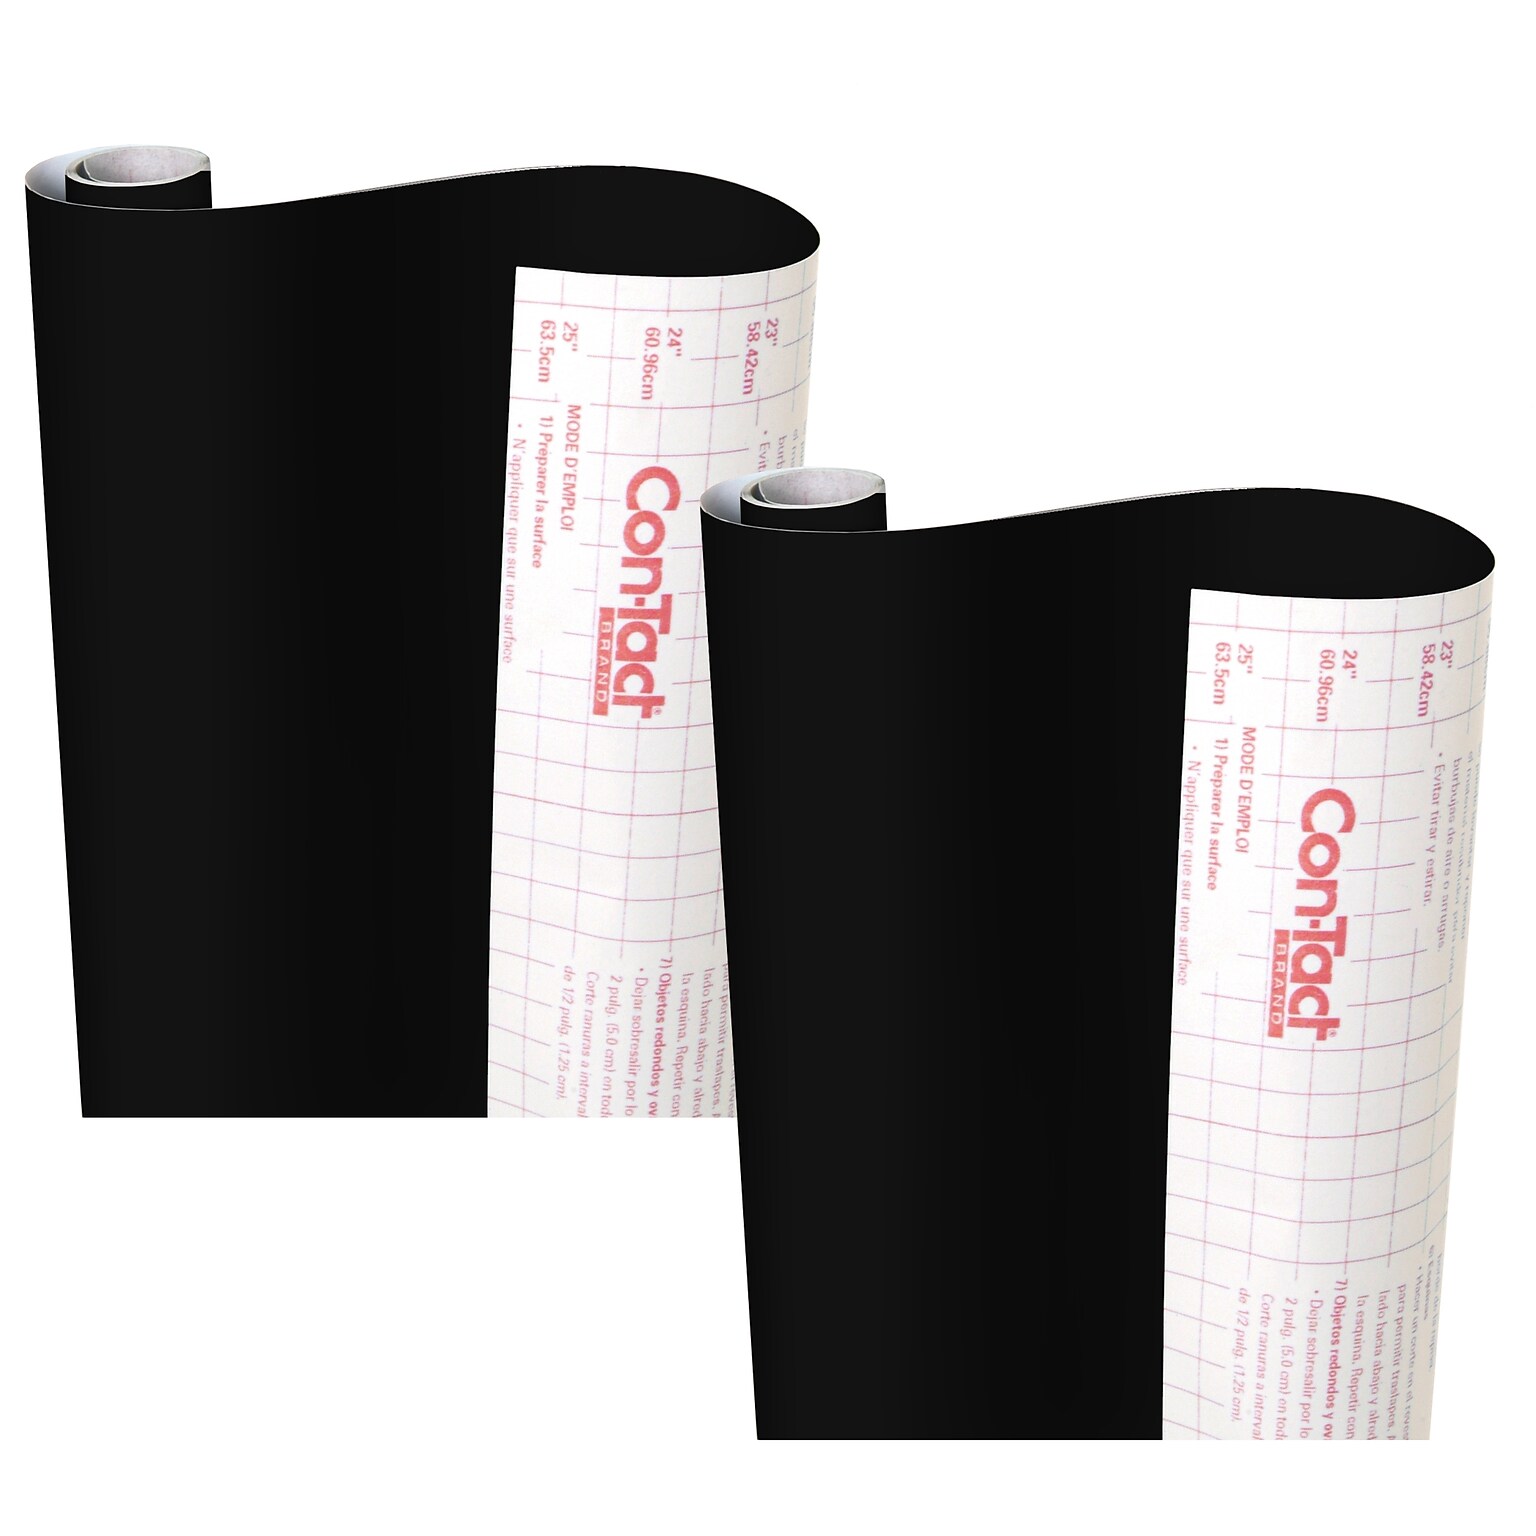 Kittrich Con-Tact Creative Covering Adhesive Covering, 18 x 16, Black, 2 Rolls/Bundle (KIT16FC9A93206-2)